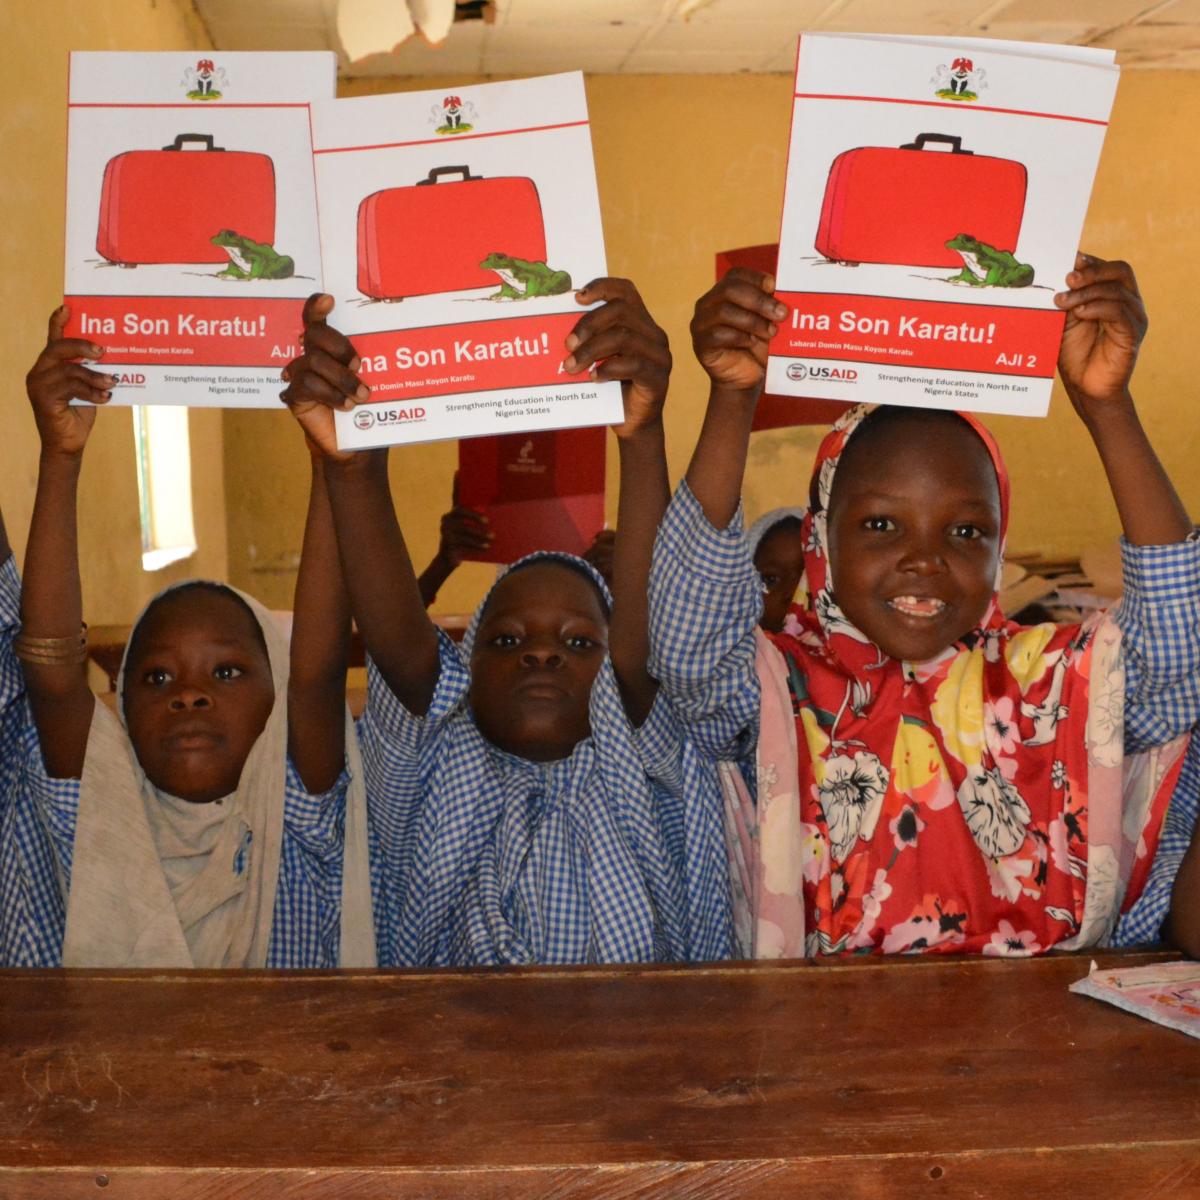 Over three years, the USAID SENSE activity will reach more than 200,000 learners, and train and provide teaching materials to 5,000 teachers to improve reading in the Hausa language in Adamawa and Gombe states